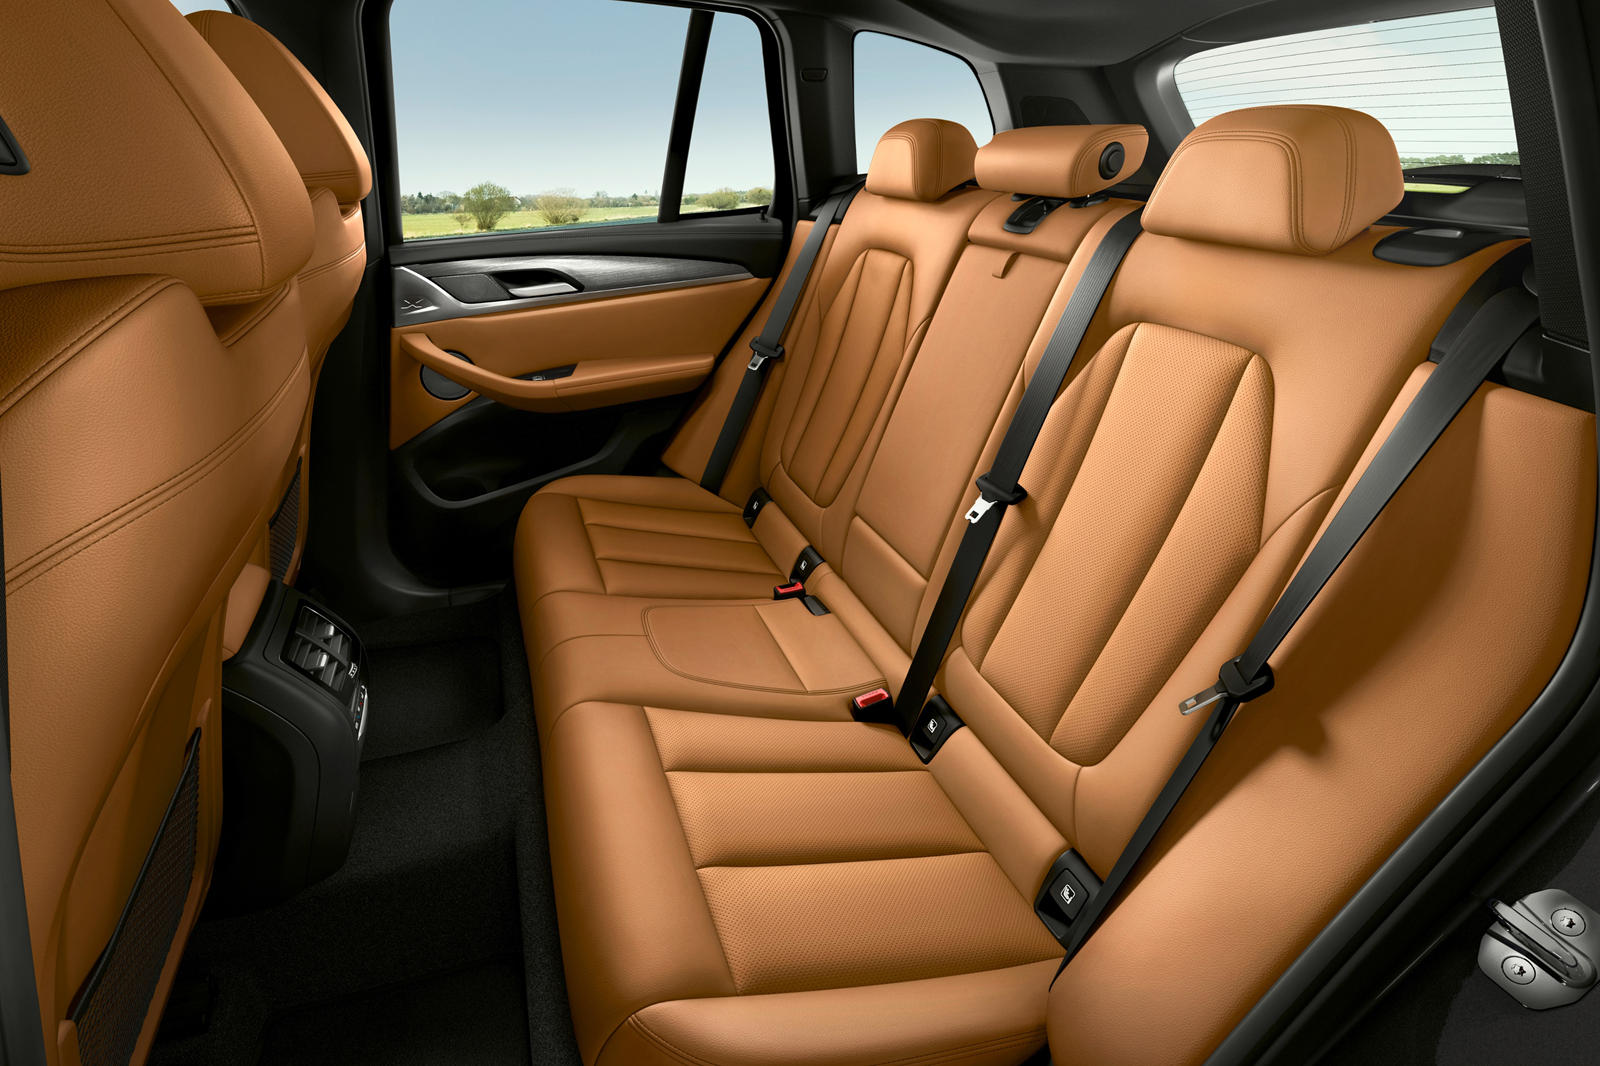 Transformer Shopkeeper childhood 2023 BMW X3 Interior Dimensions: Seating, Cargo Space & Trunk Size - Photos  | CarBuzz